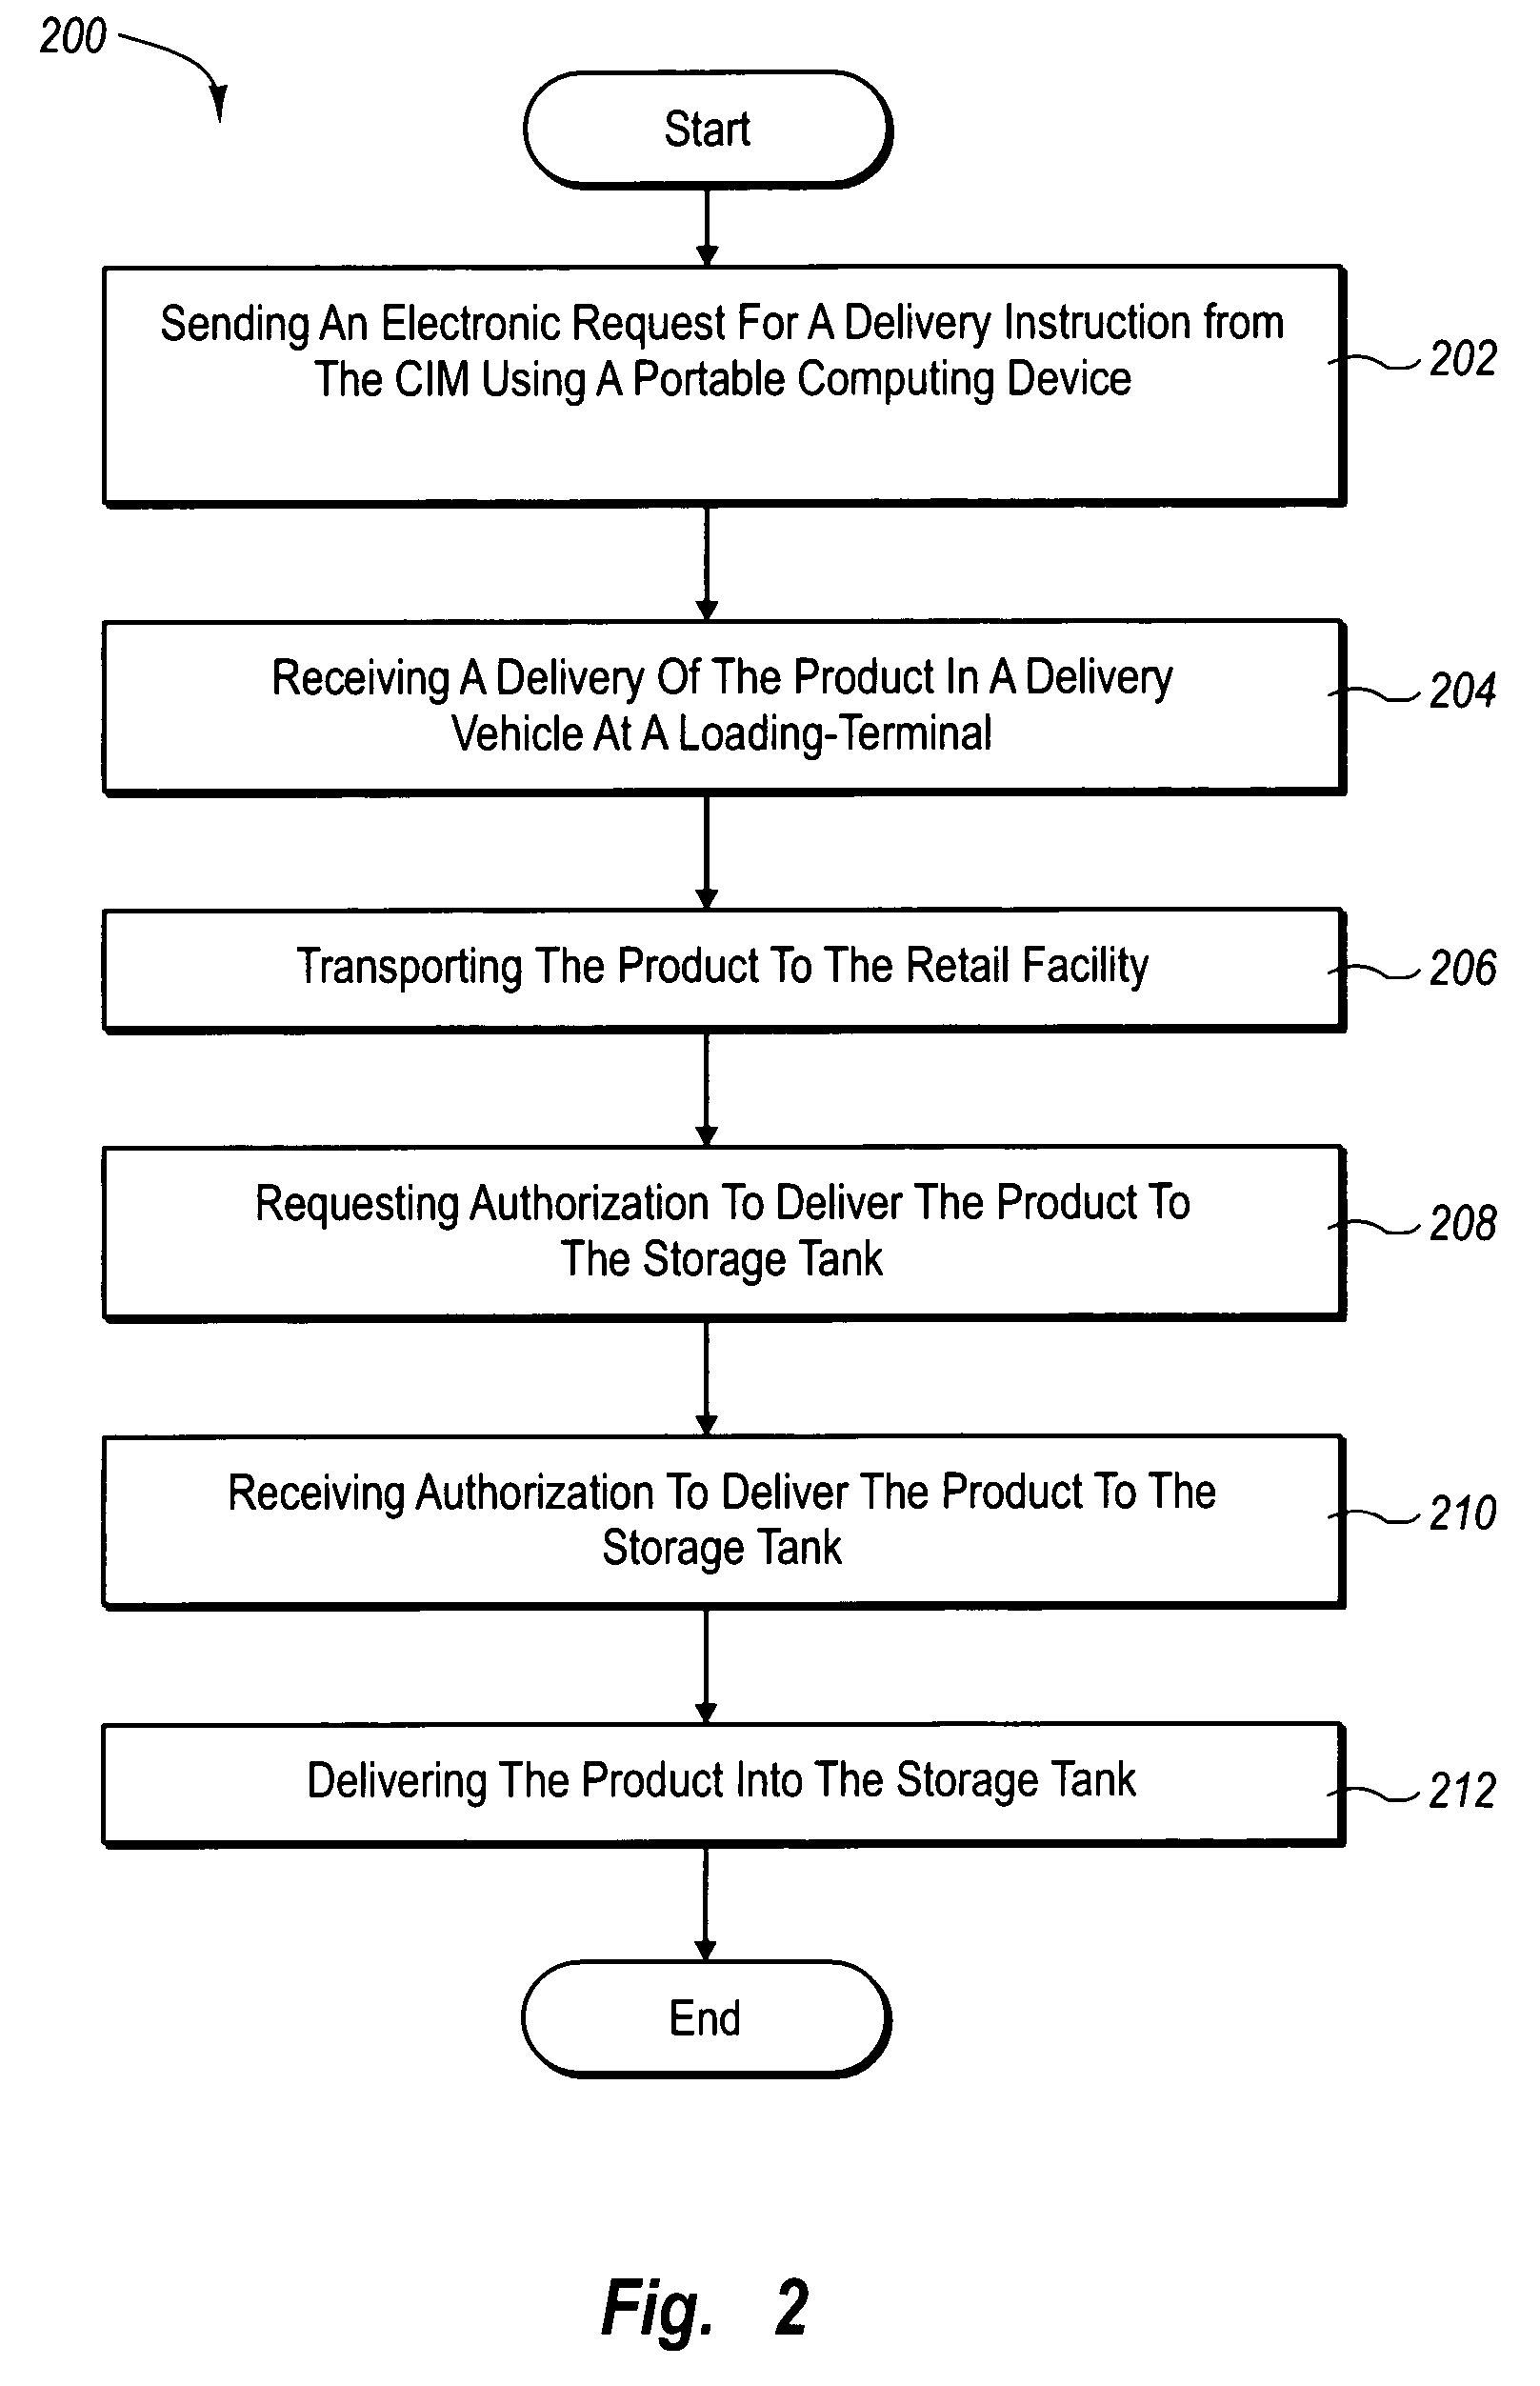 Performing an on-demand book balance to physical balance reconciliation process for liquid product